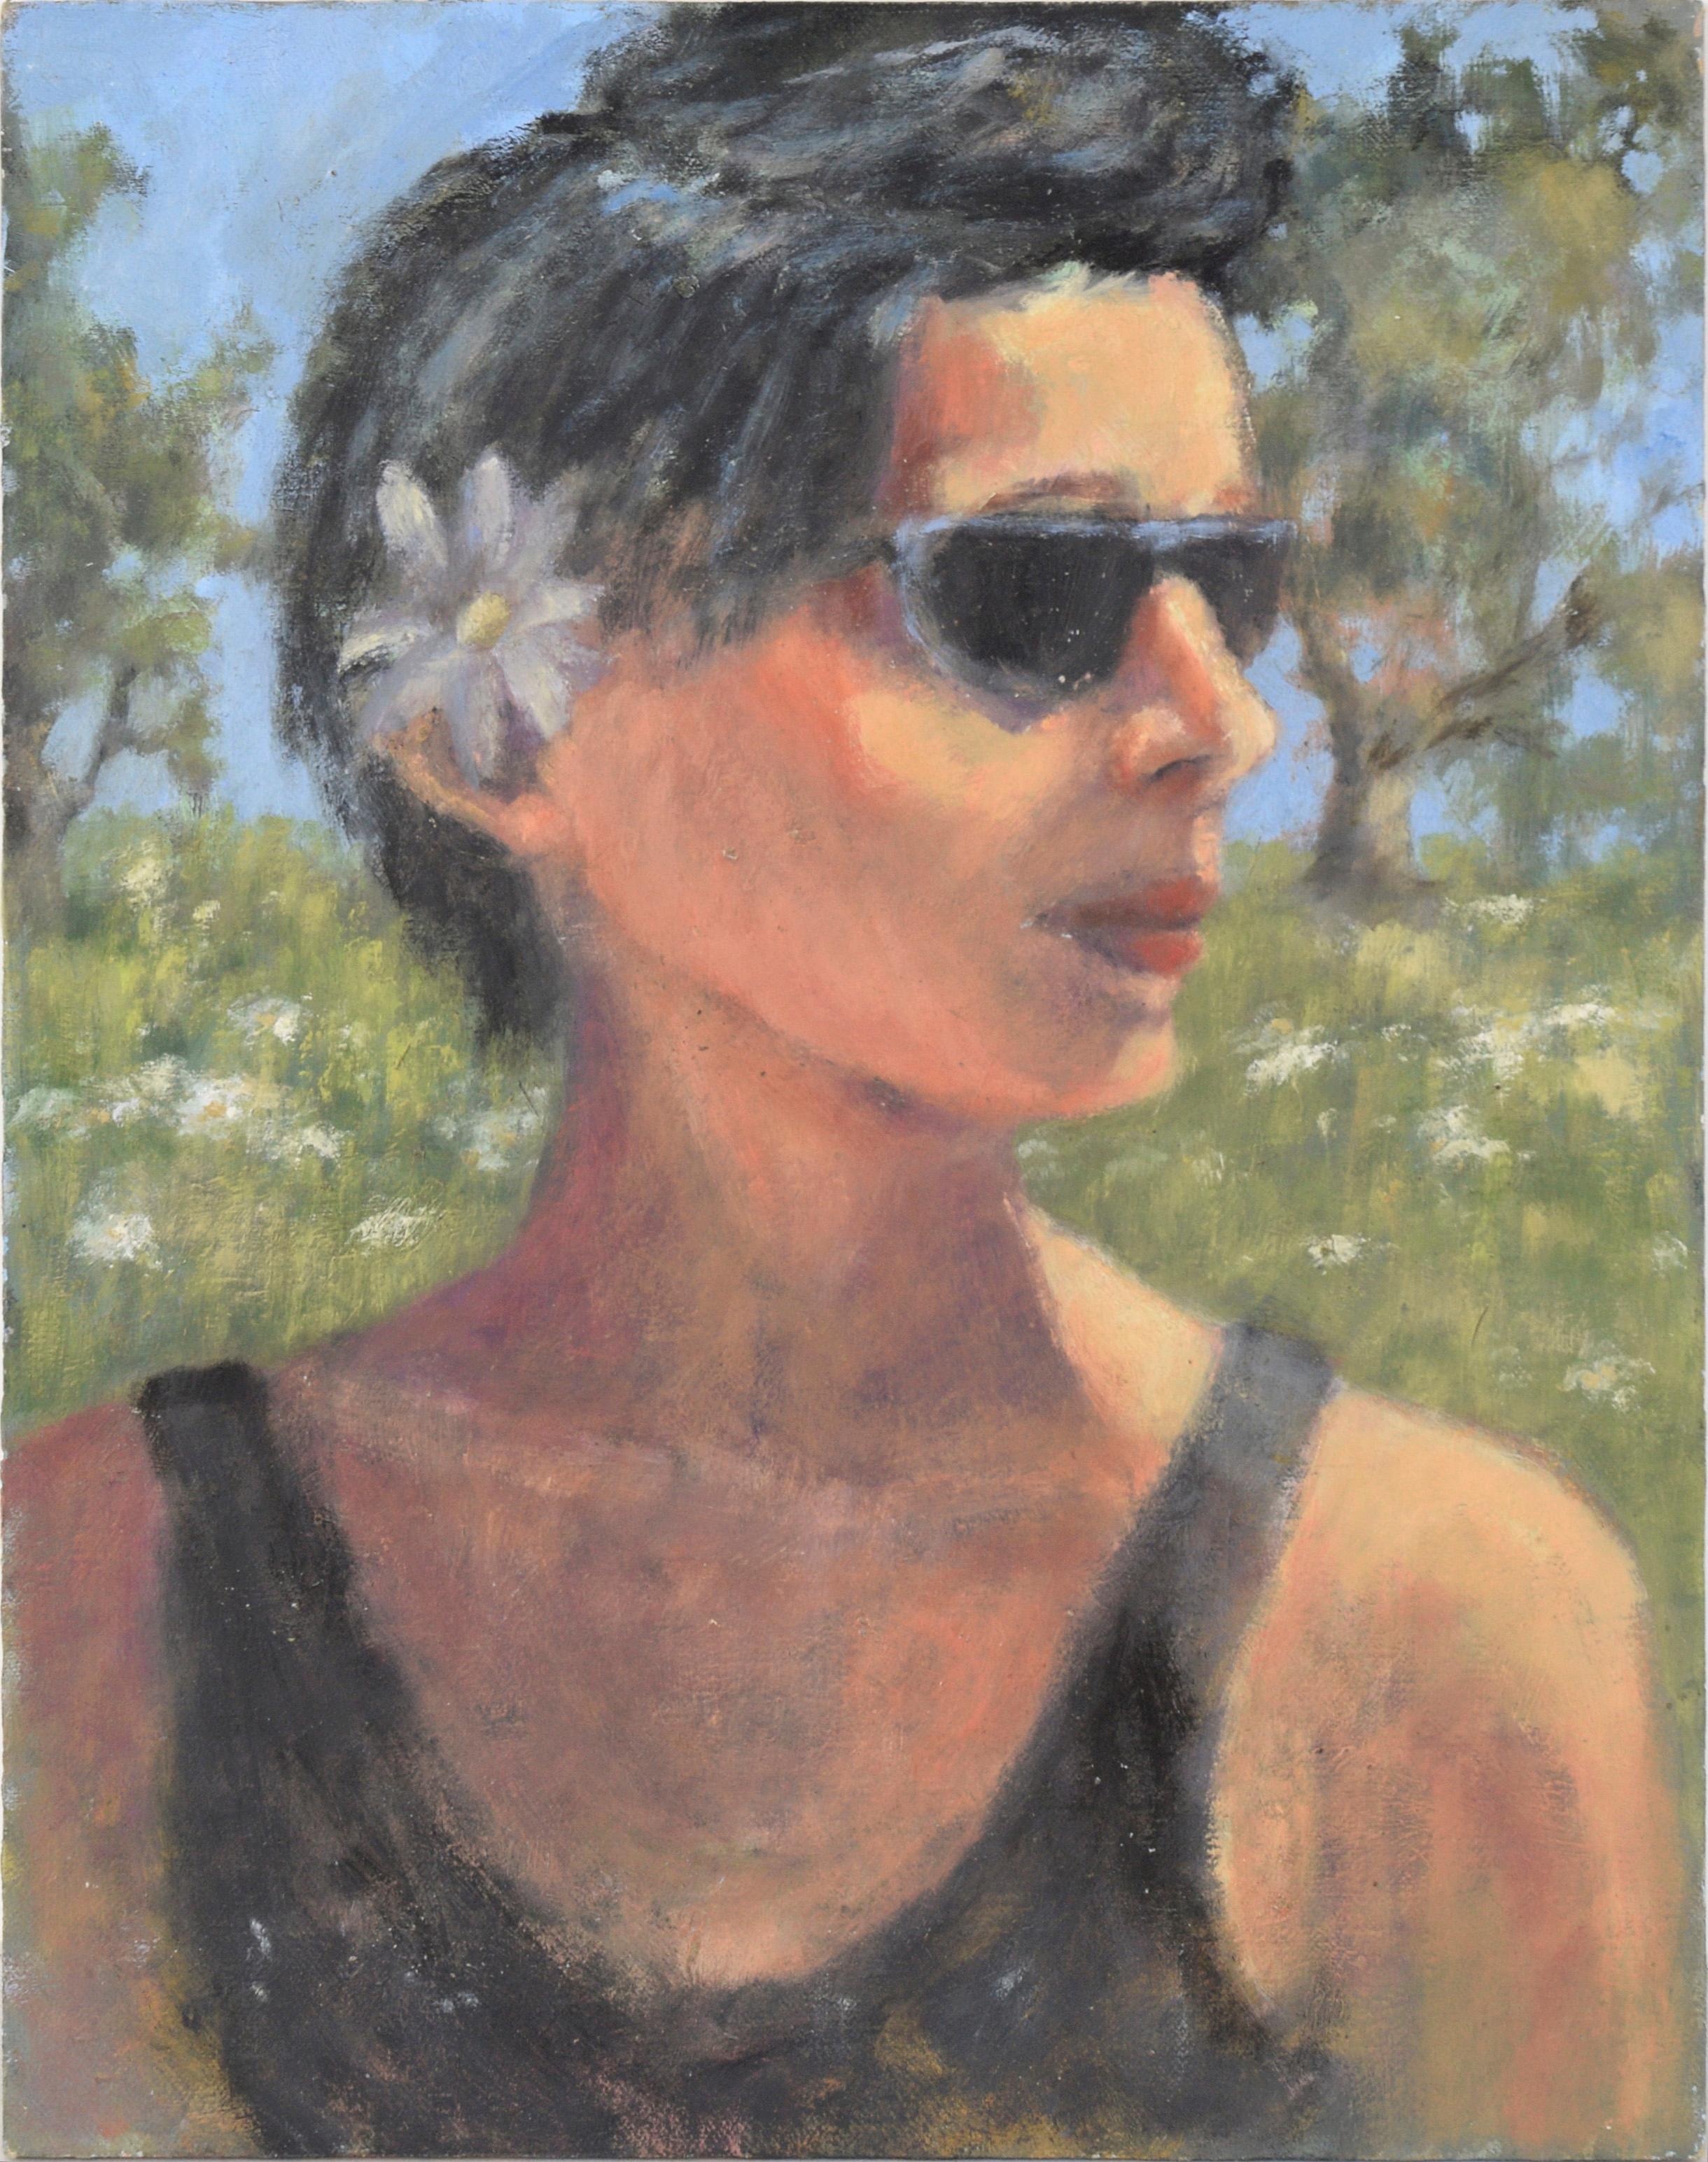 M. Pavao Figurative Painting - Portrait of a California Woman with Sunglasses in Acrylic on Masonite